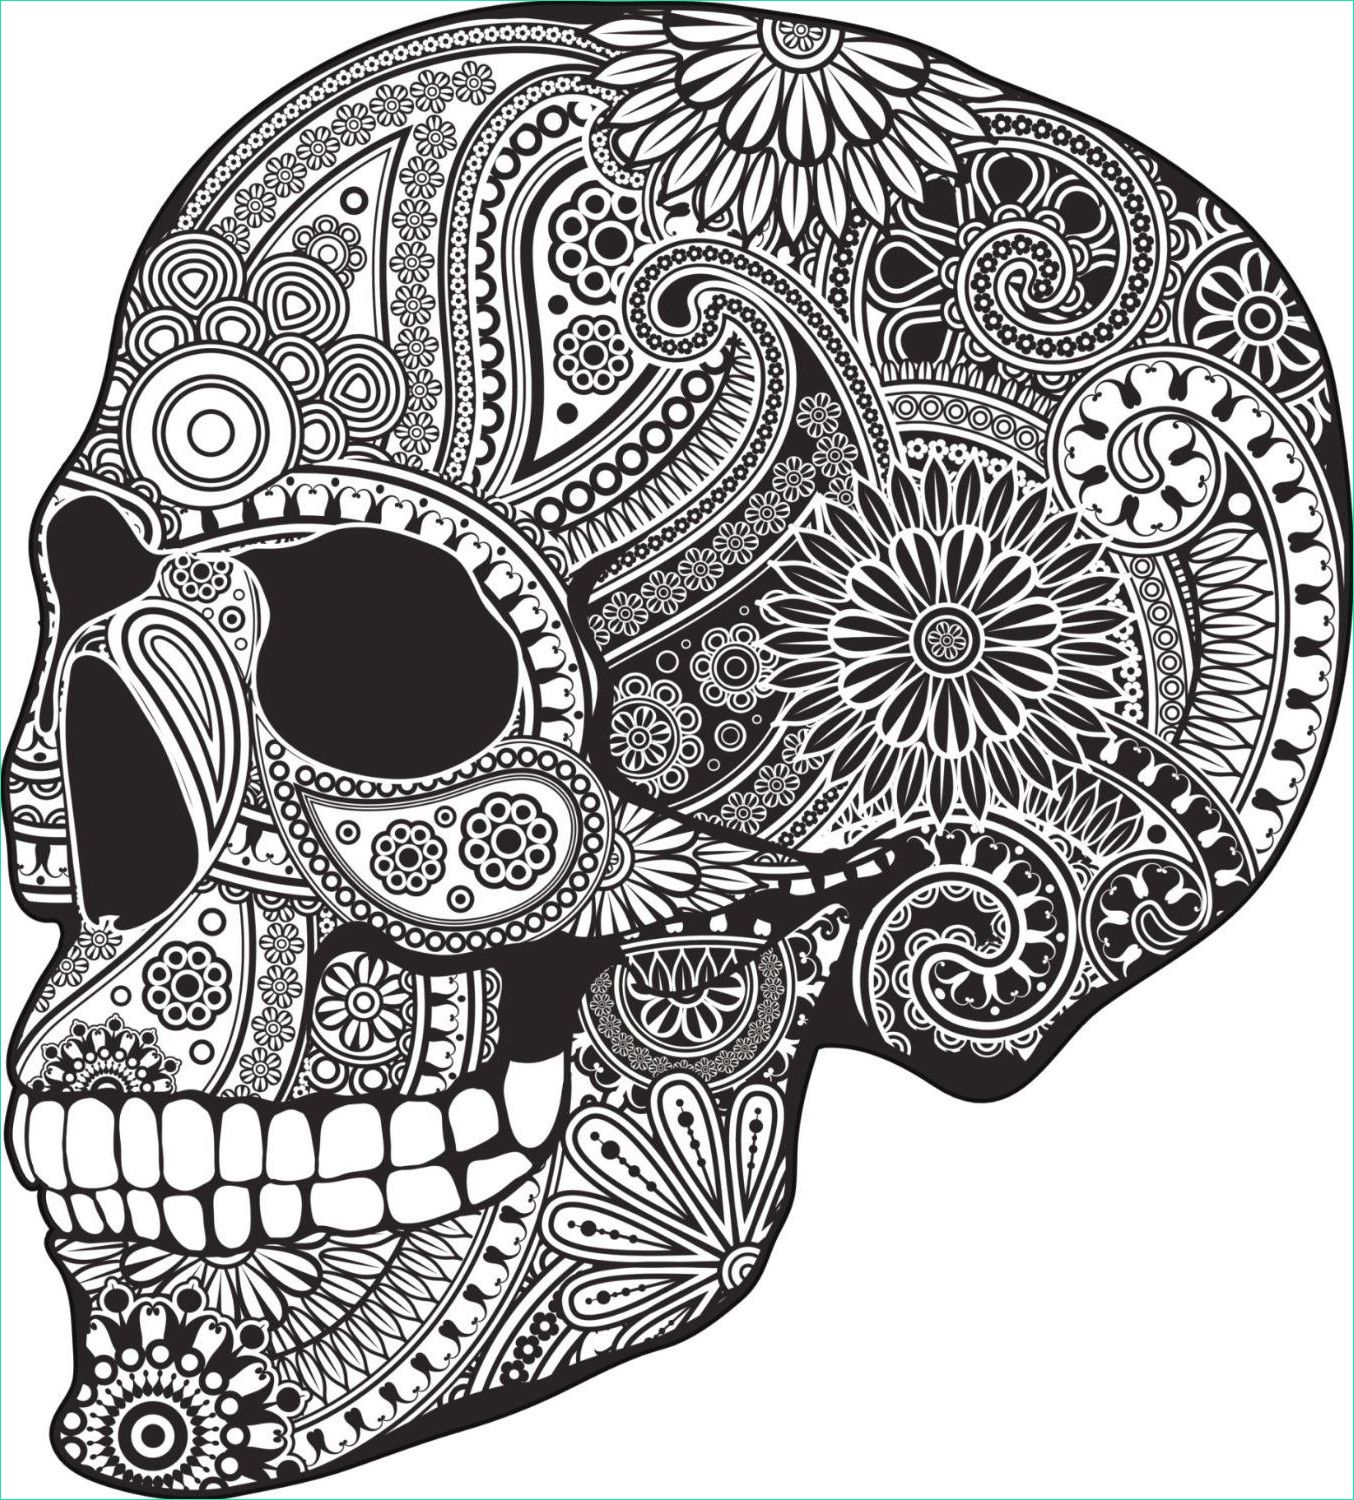 Coloriage Mandala Tete De Mort Beau Photos Pin On Adult Coloring Pages the Best Of the Best